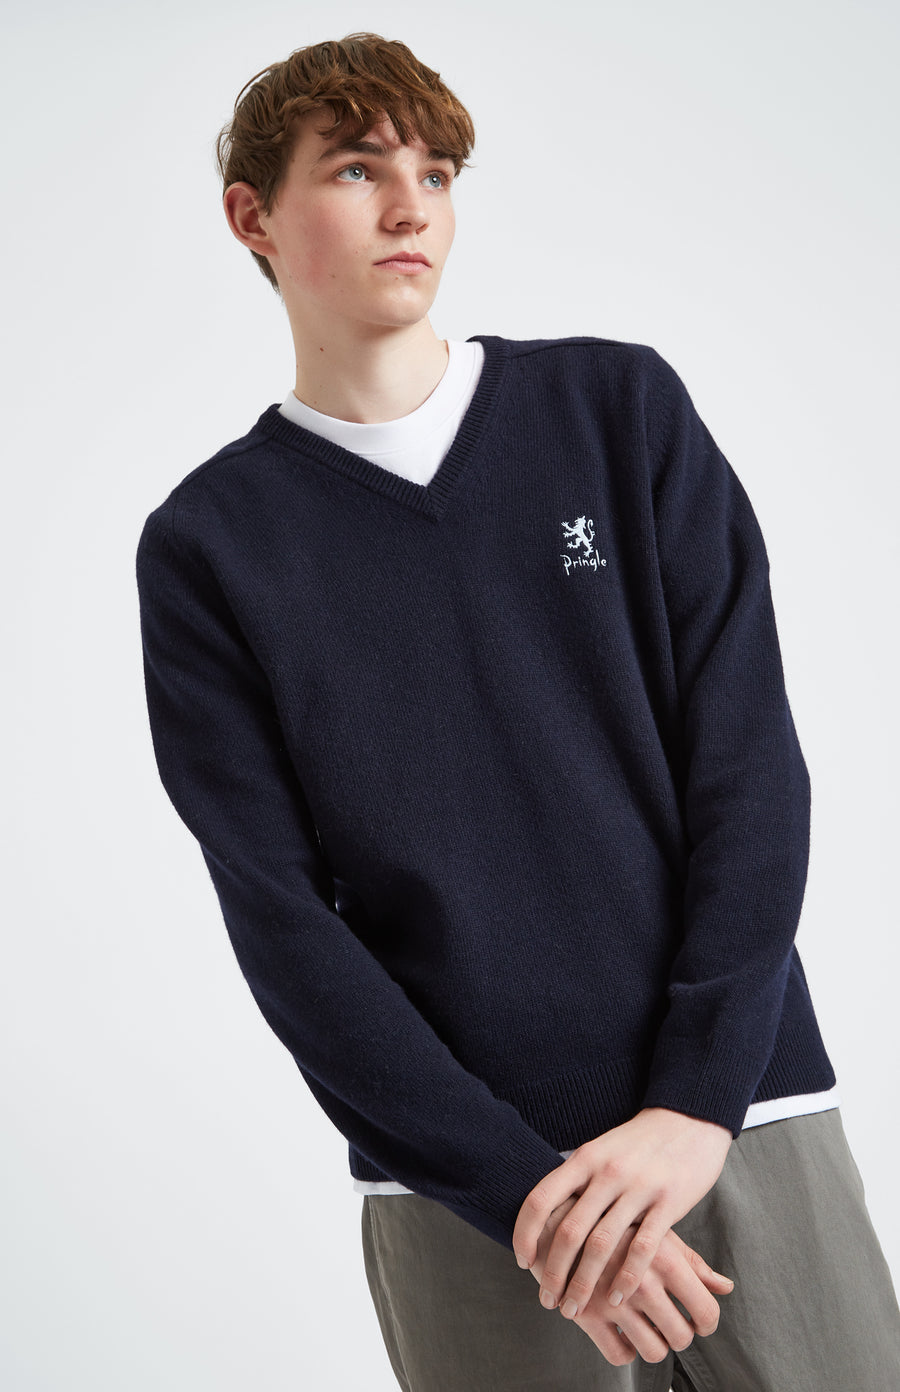 Archive Lambswool Blend Jumper In Navy - Pringle of Scotland